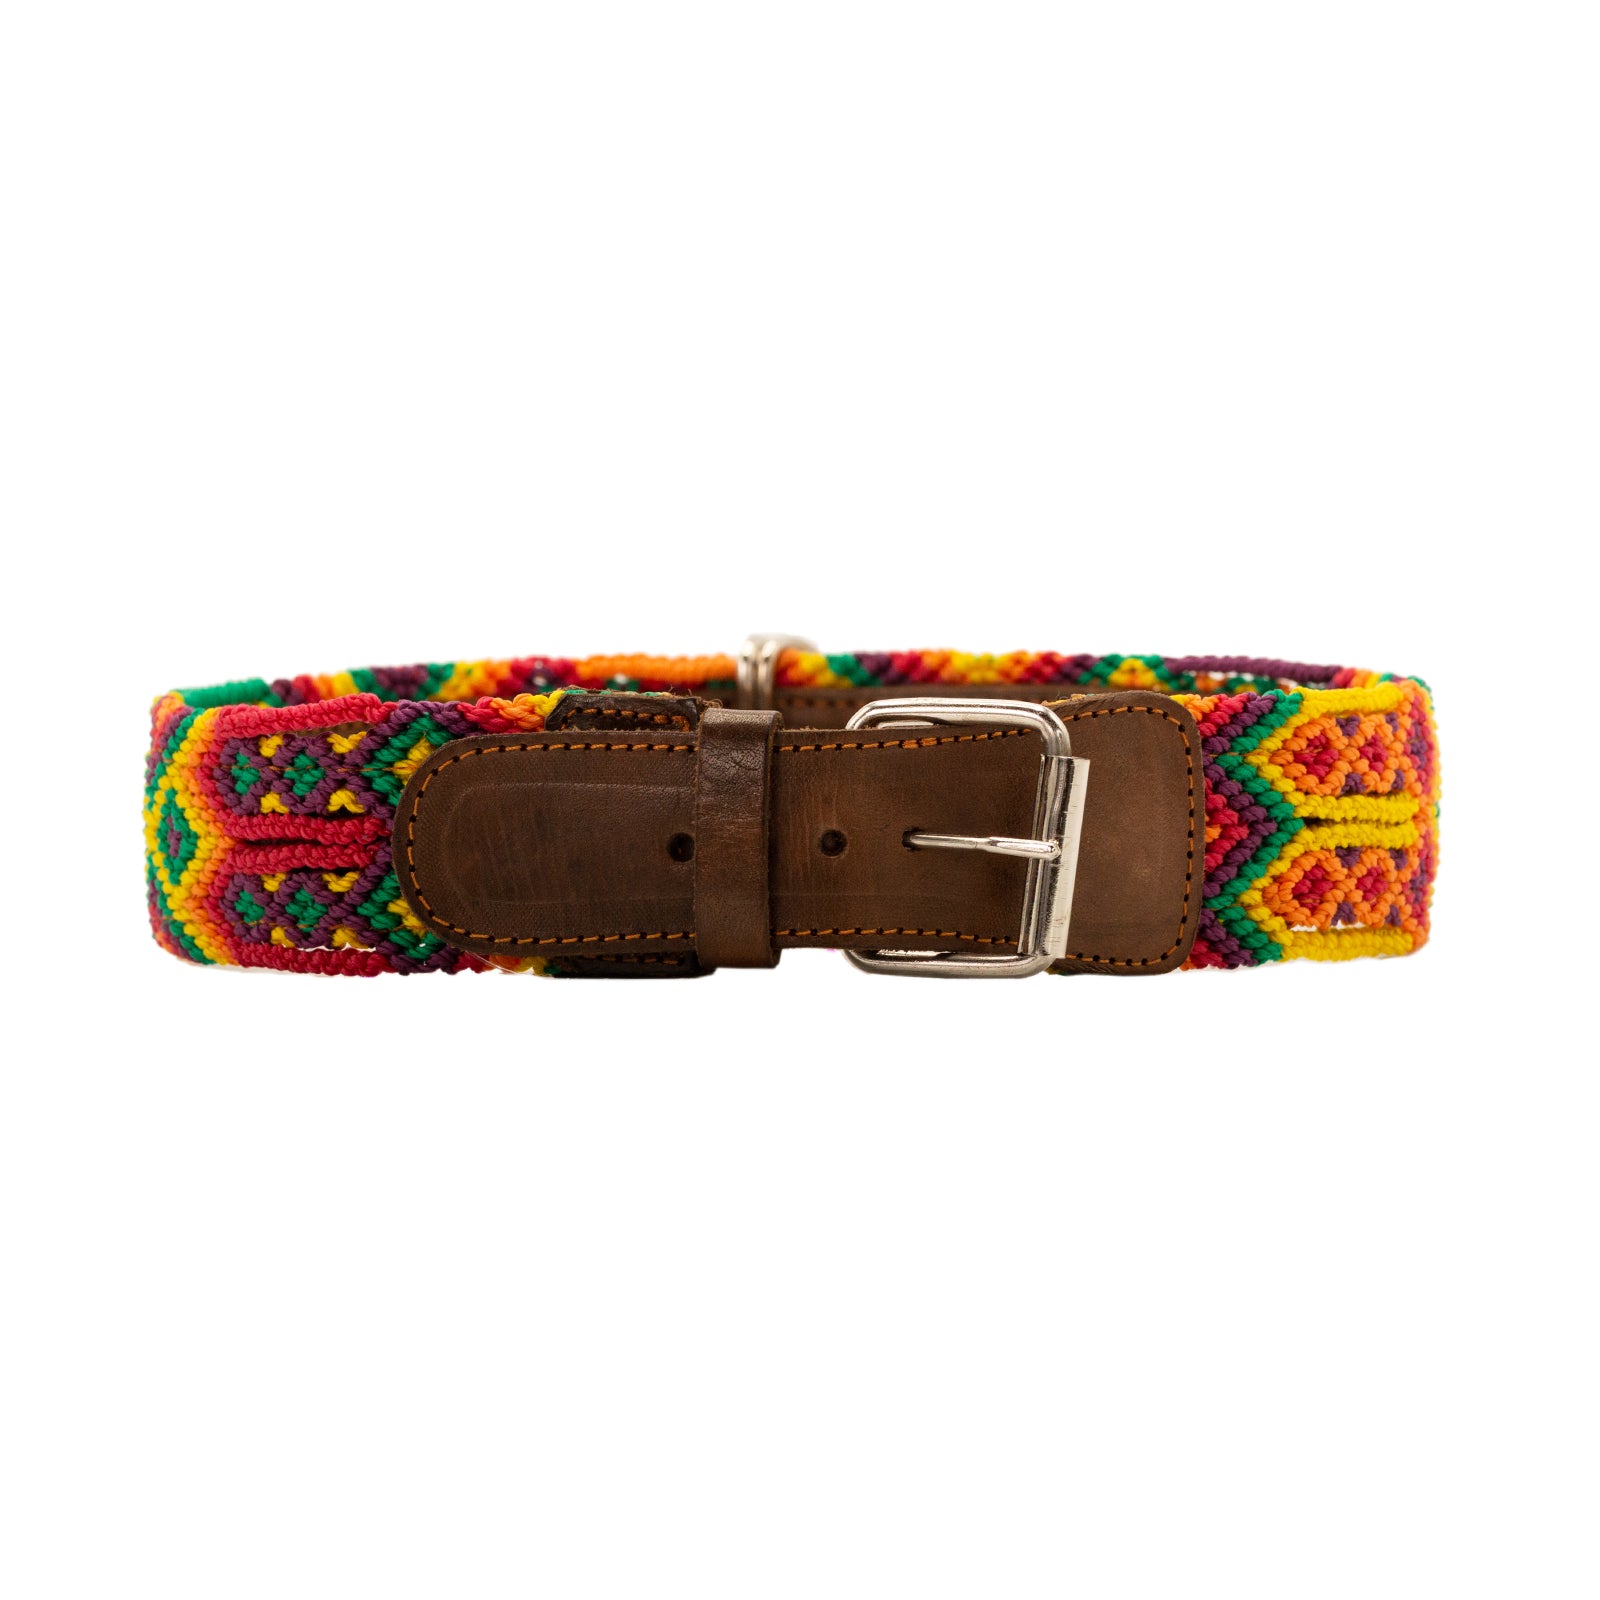 Artisan-made dog collar with a touch of bohemian flair